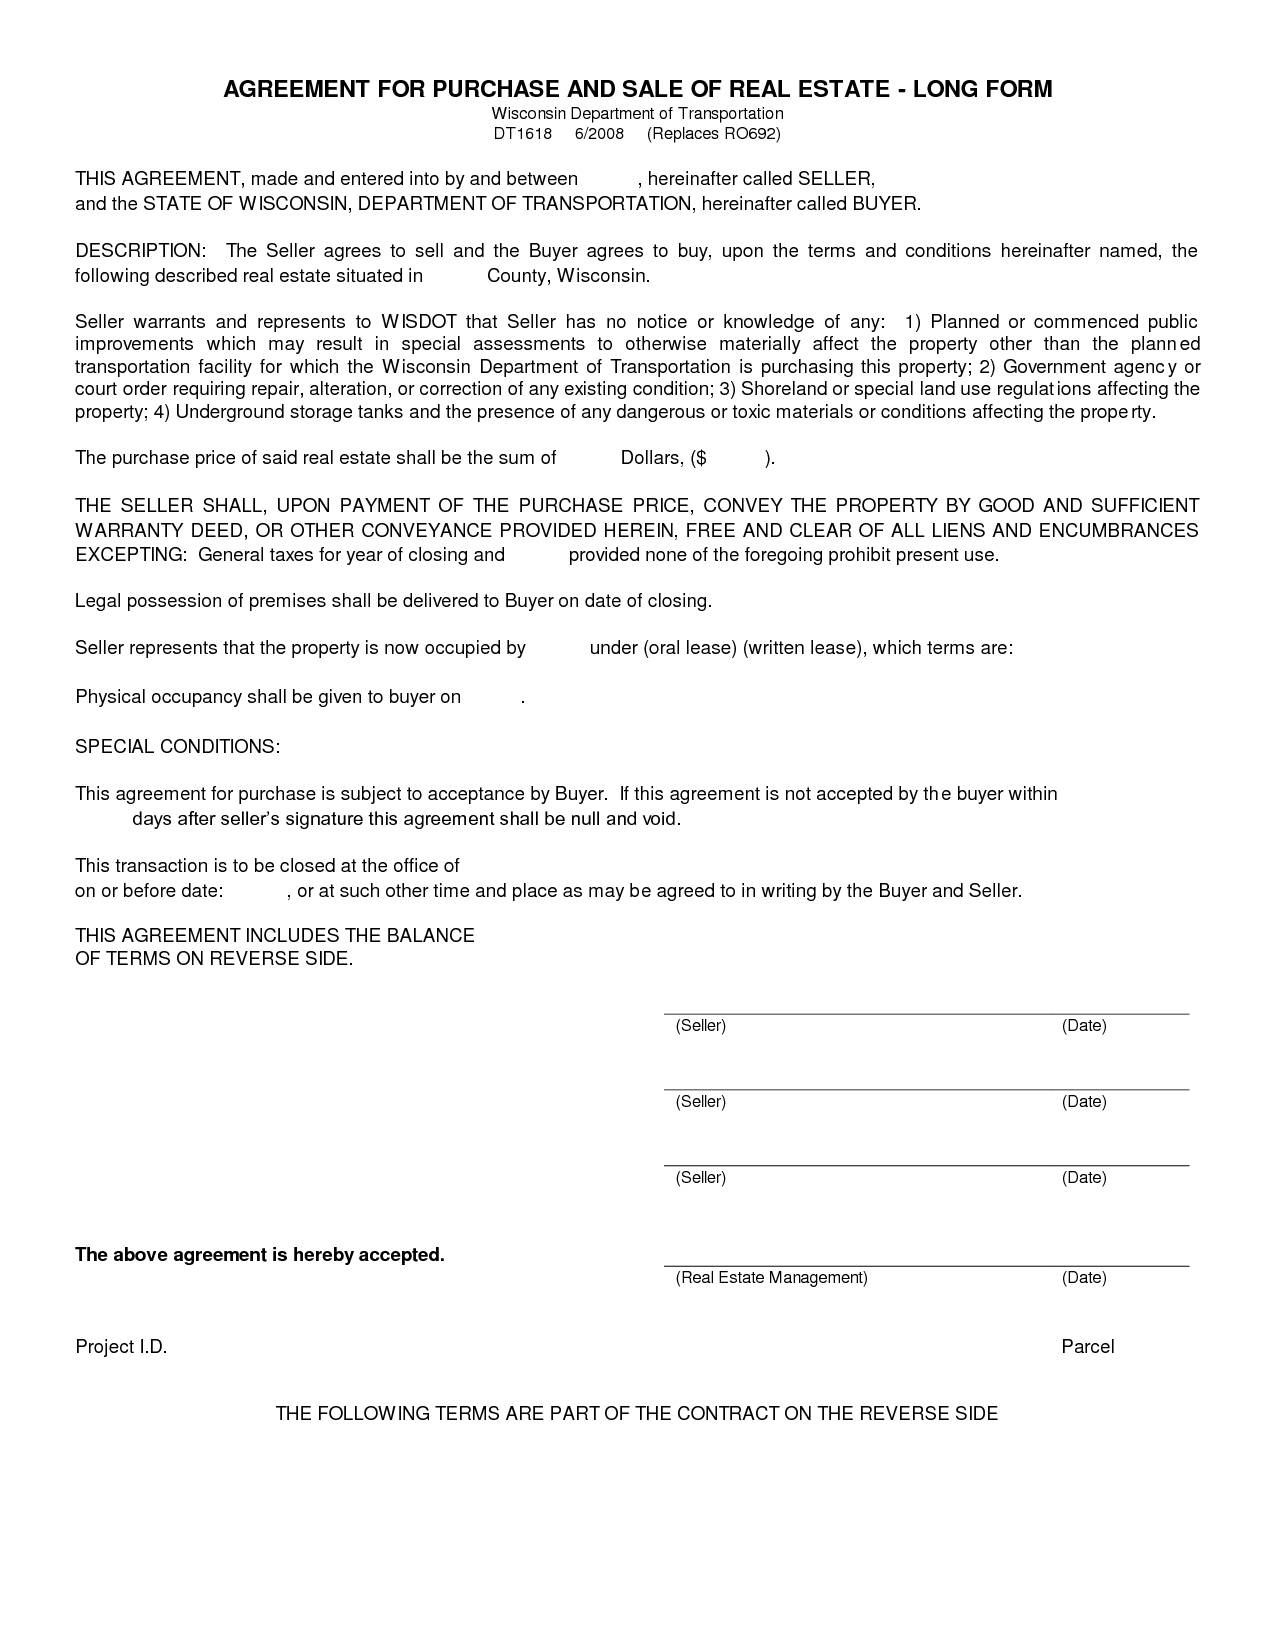 Free Blank Purchase Agreement Form Images - Agreement To Purchase - Free Printable Real Estate Purchase Agreement